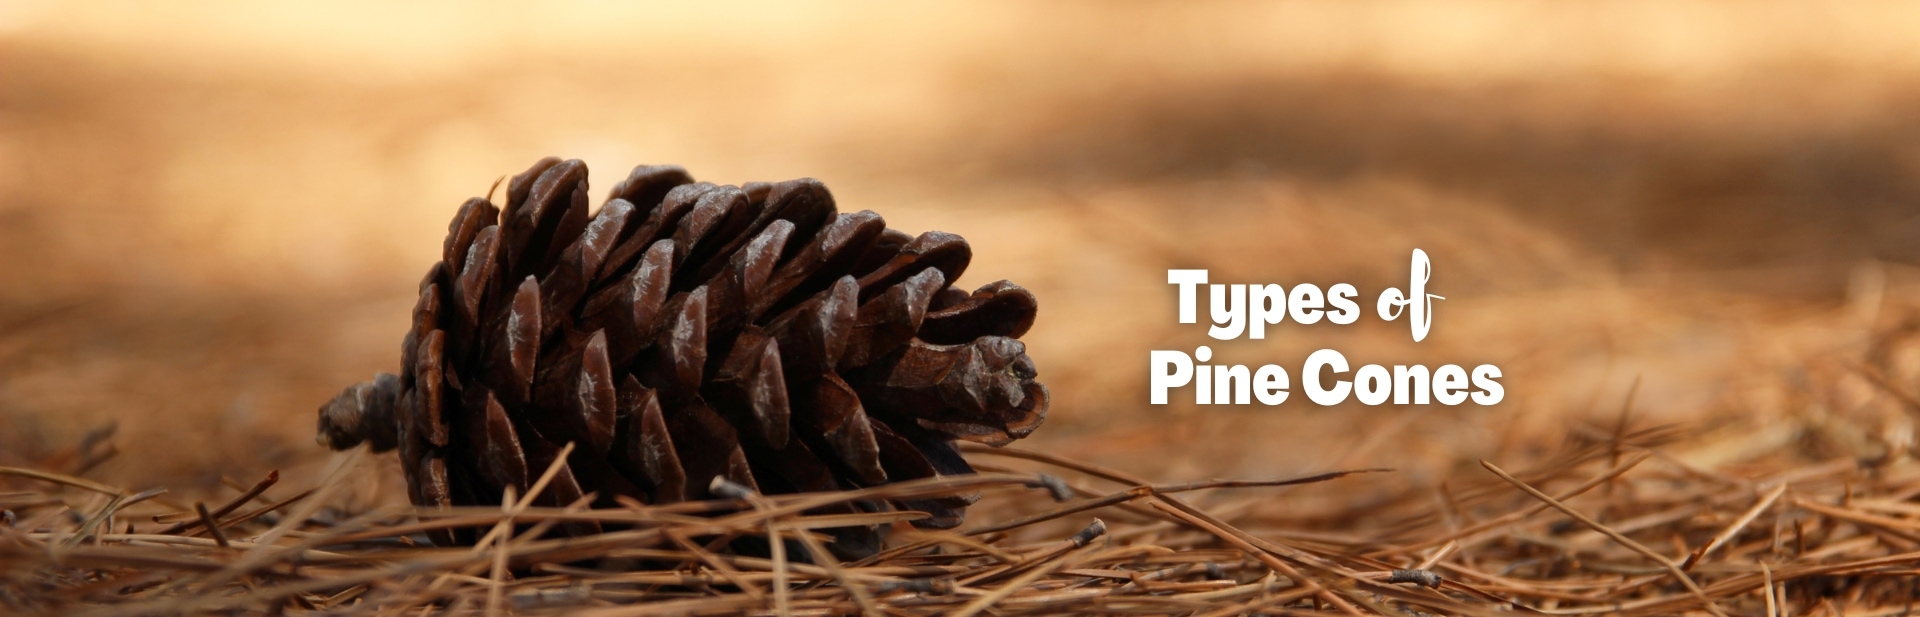 Exploring the 20 Weirdest and Most Amazing Types of Pine Cones